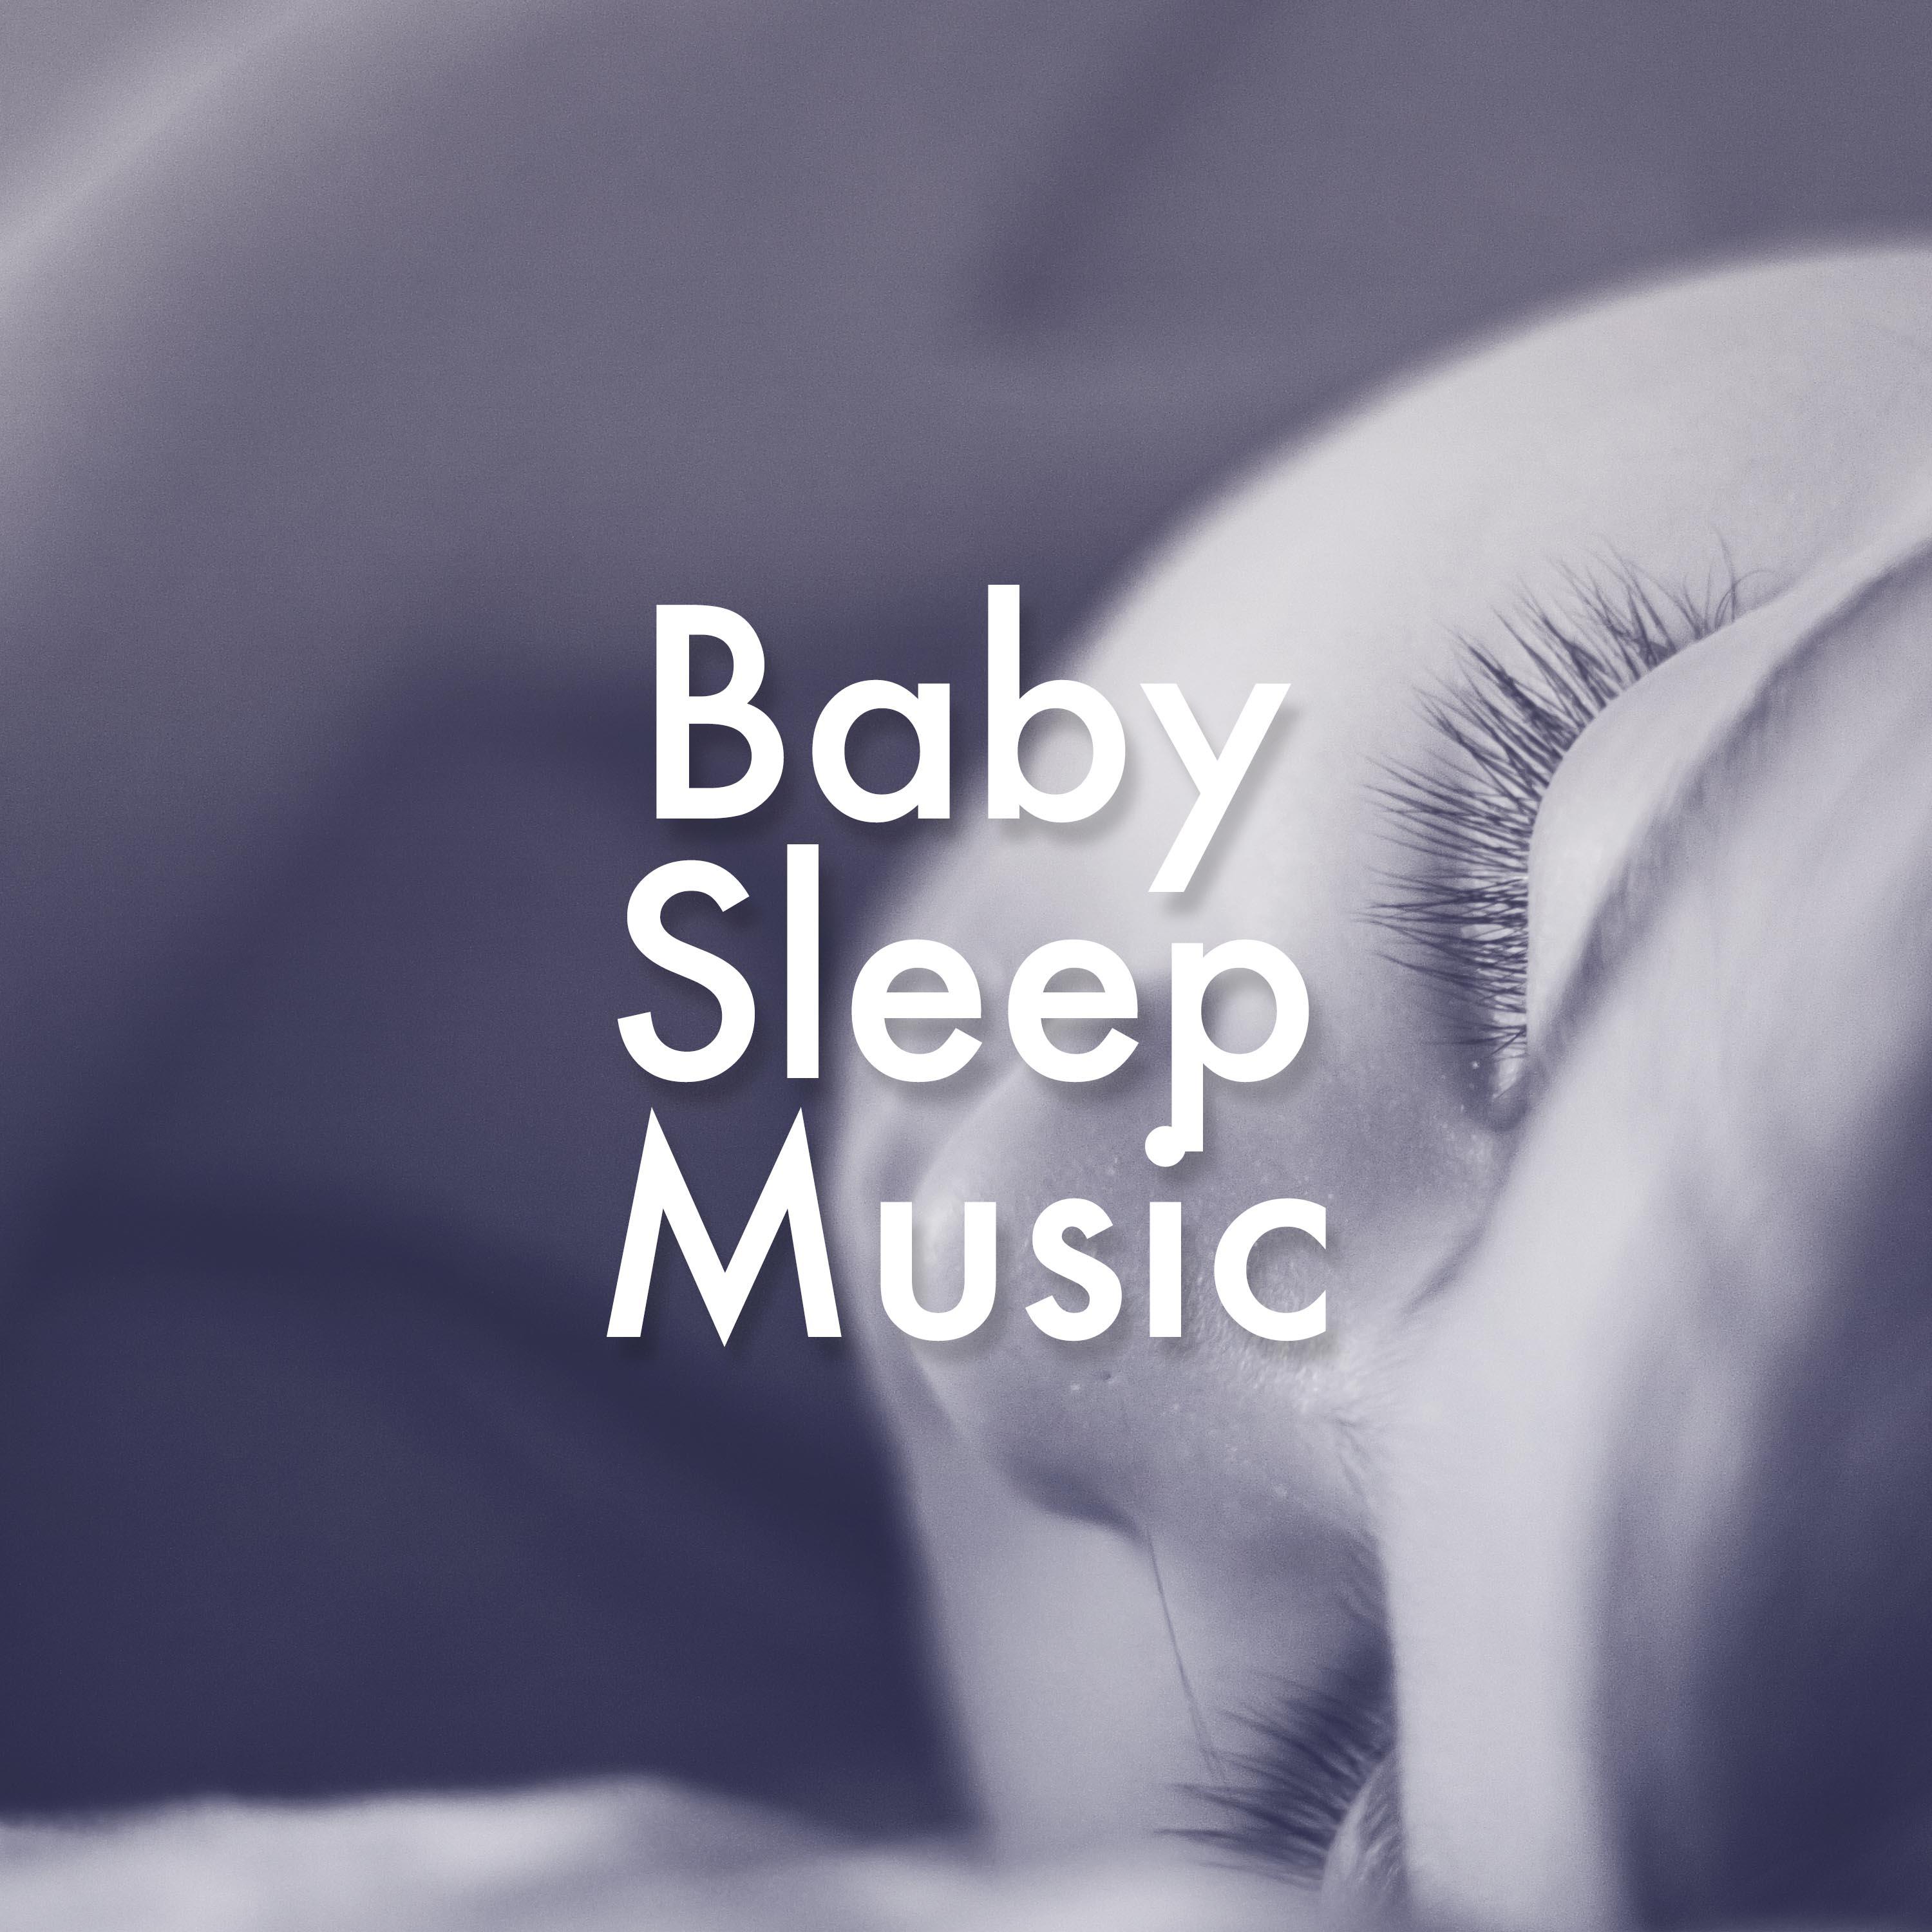 Baby Sleep Music: Lullaby Songs for Baby, Lullabies for Toddlers, Sounds to Help you Sleep